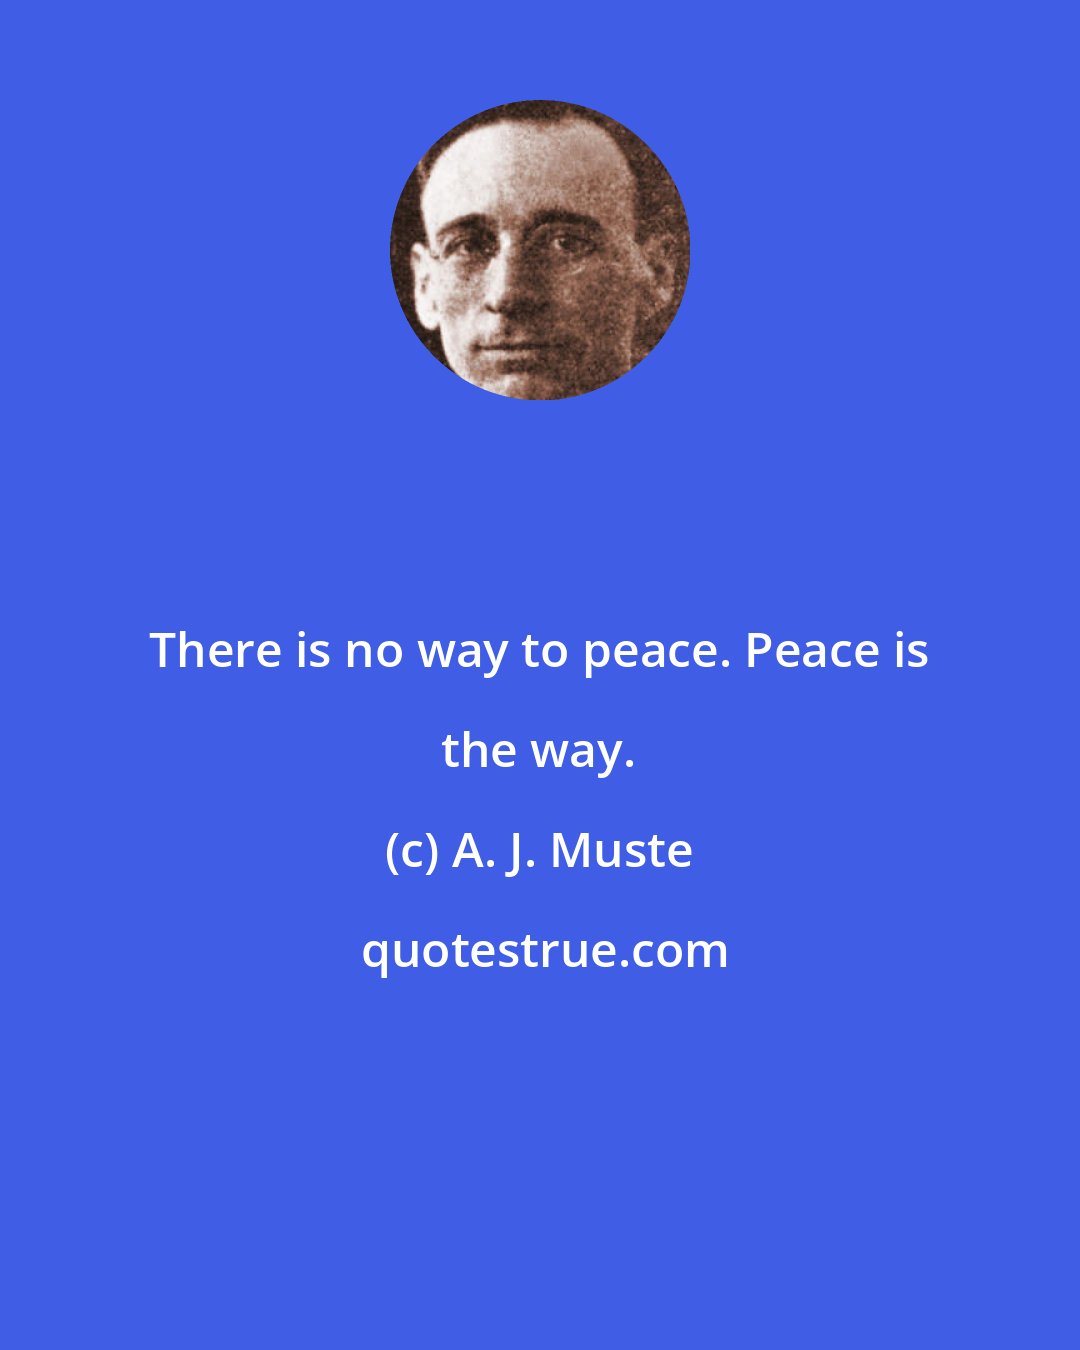 A. J. Muste: There is no way to peace. Peace is the way.